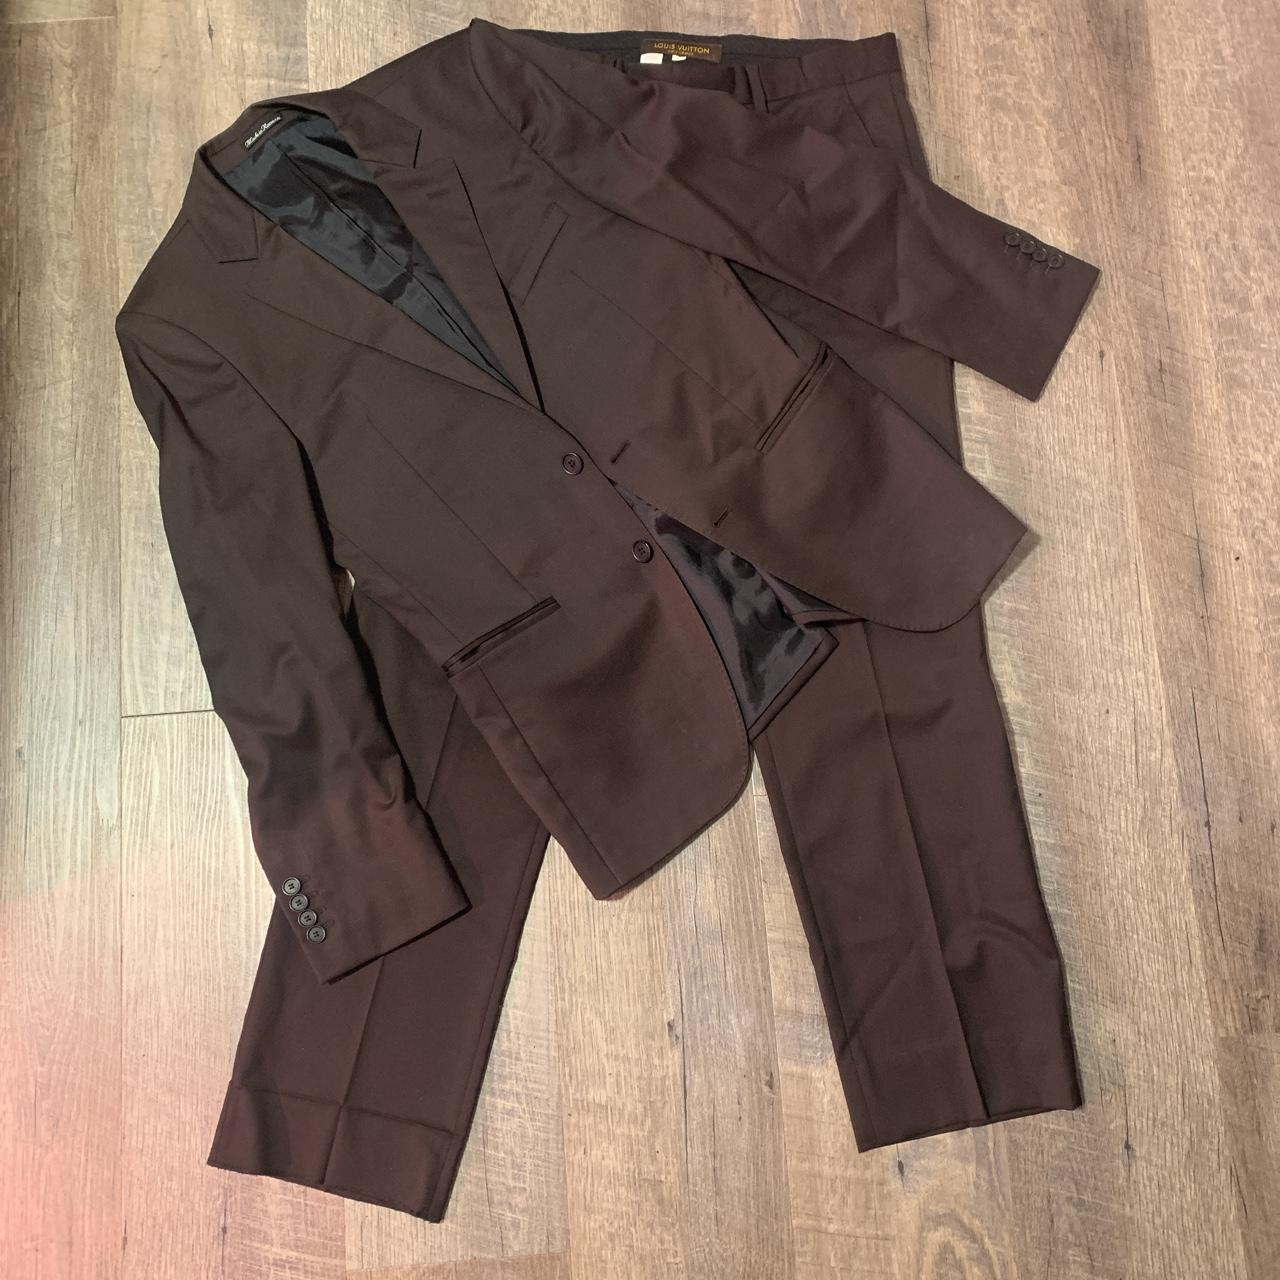 Brown Louis Vuitton suit, worn once. Brand new.